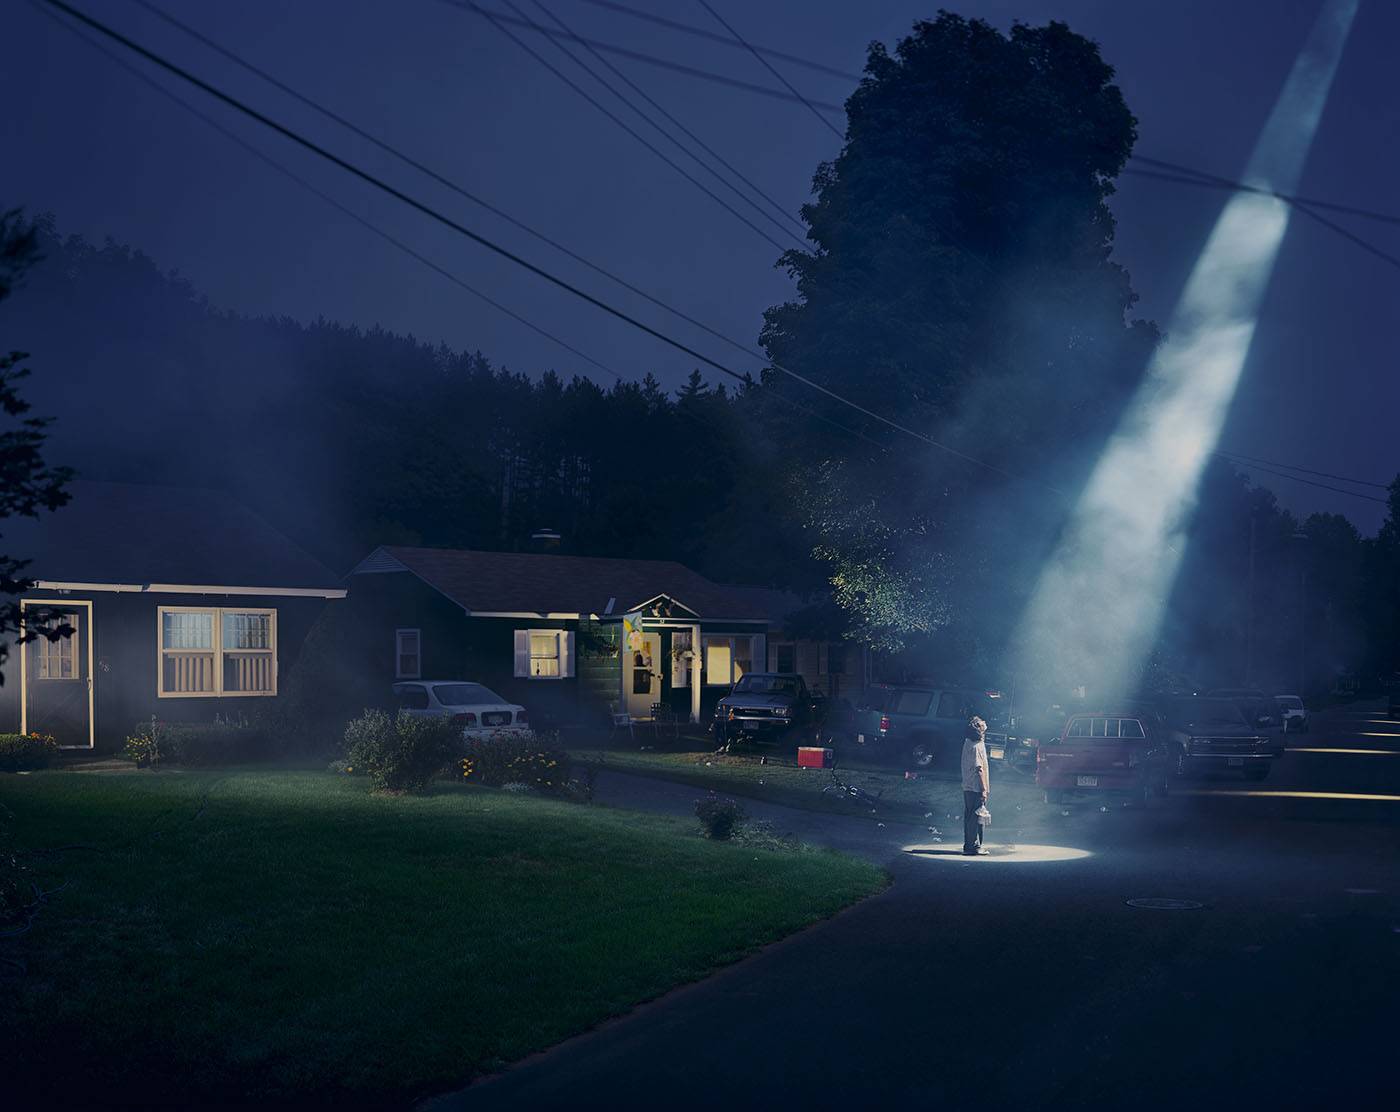 Gregory Crewdson, Untitled from the series: Twilight, 1998-2002 (ALBERTINA, Wien. Permanent loan - Kerry Propper, Art Invest II LLC © Gregory Crewdson)